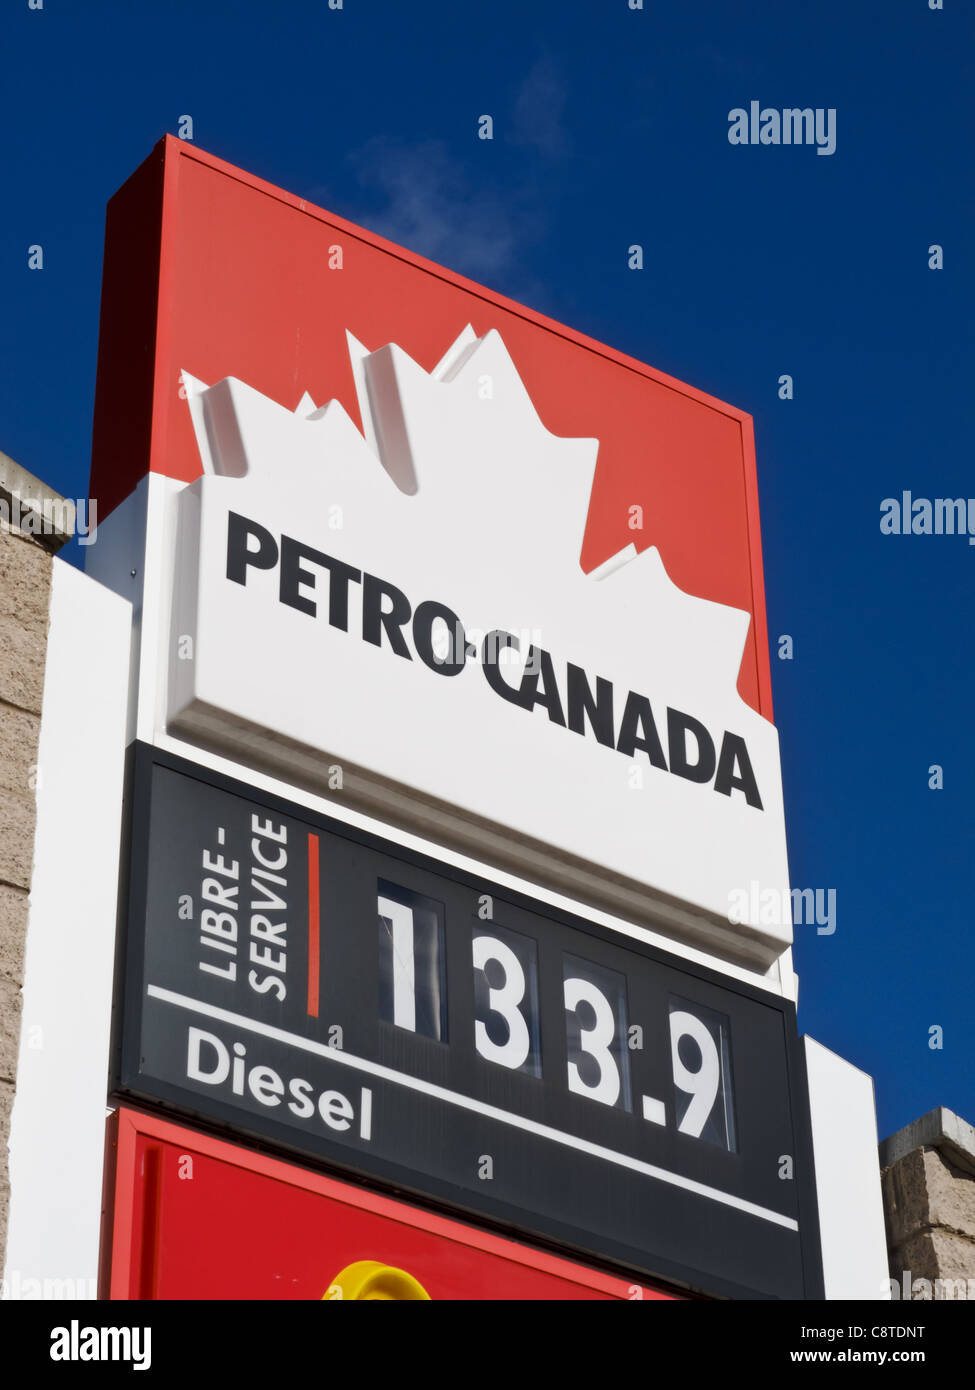 Gas price in Canada, 133.9 dollarcent at Petro-Canada gas station Stock Photo